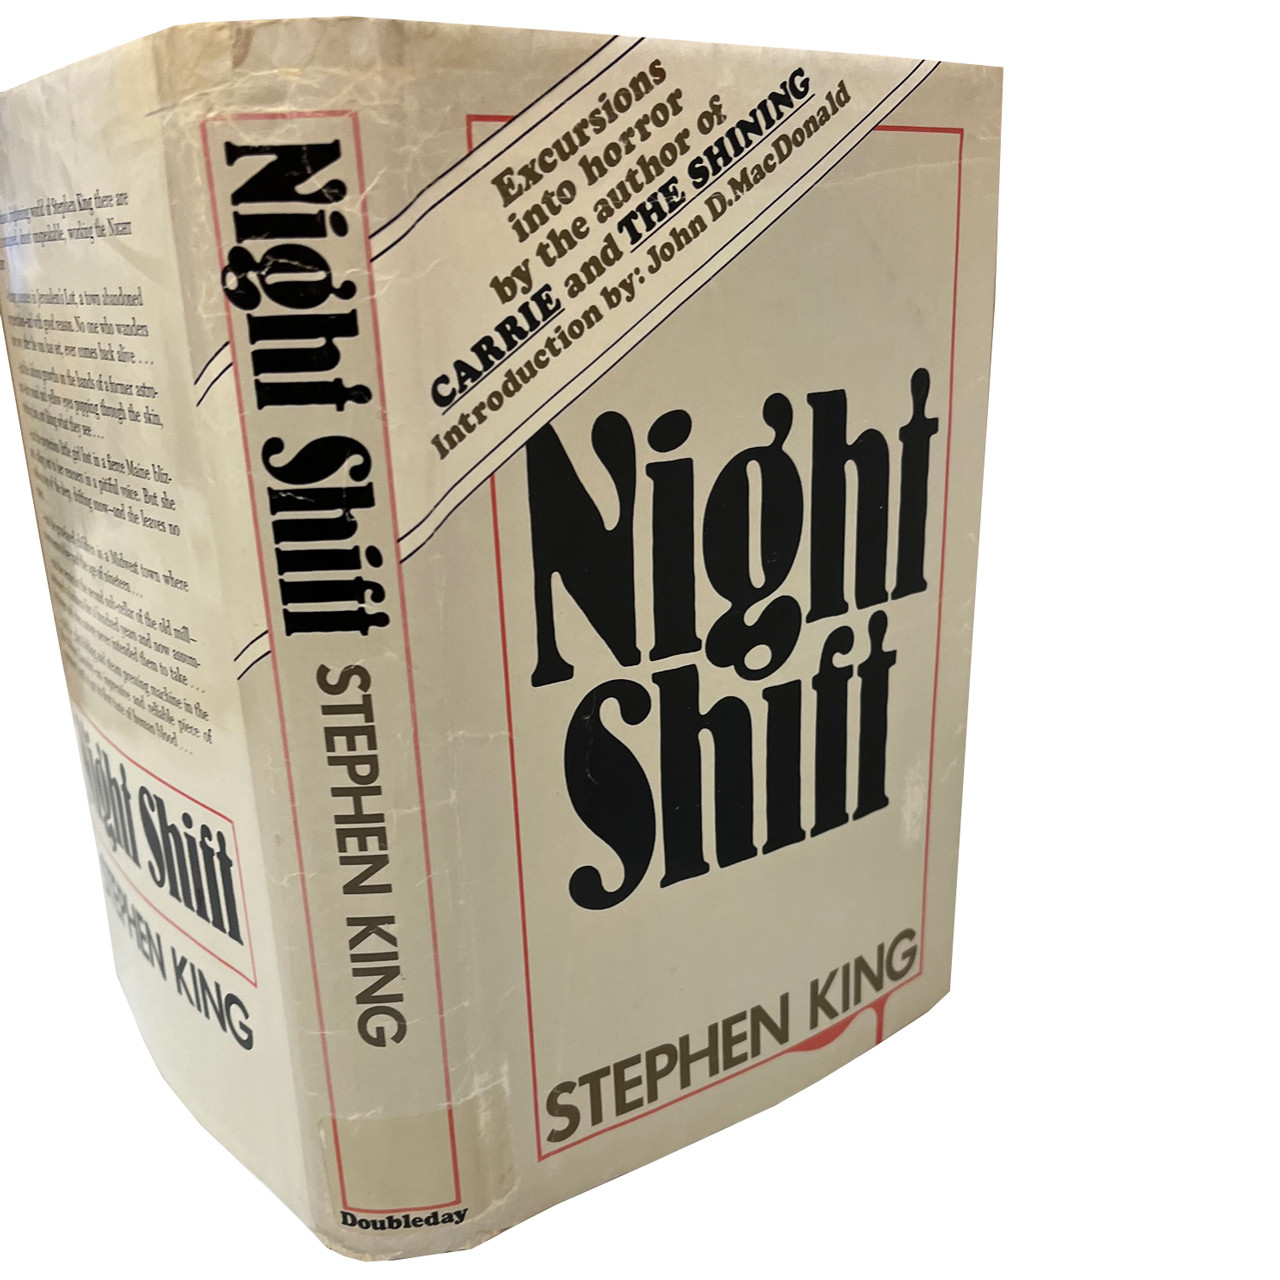 Stephen King "Night Shift" First Edition, First Printing w/CustomSlipcase